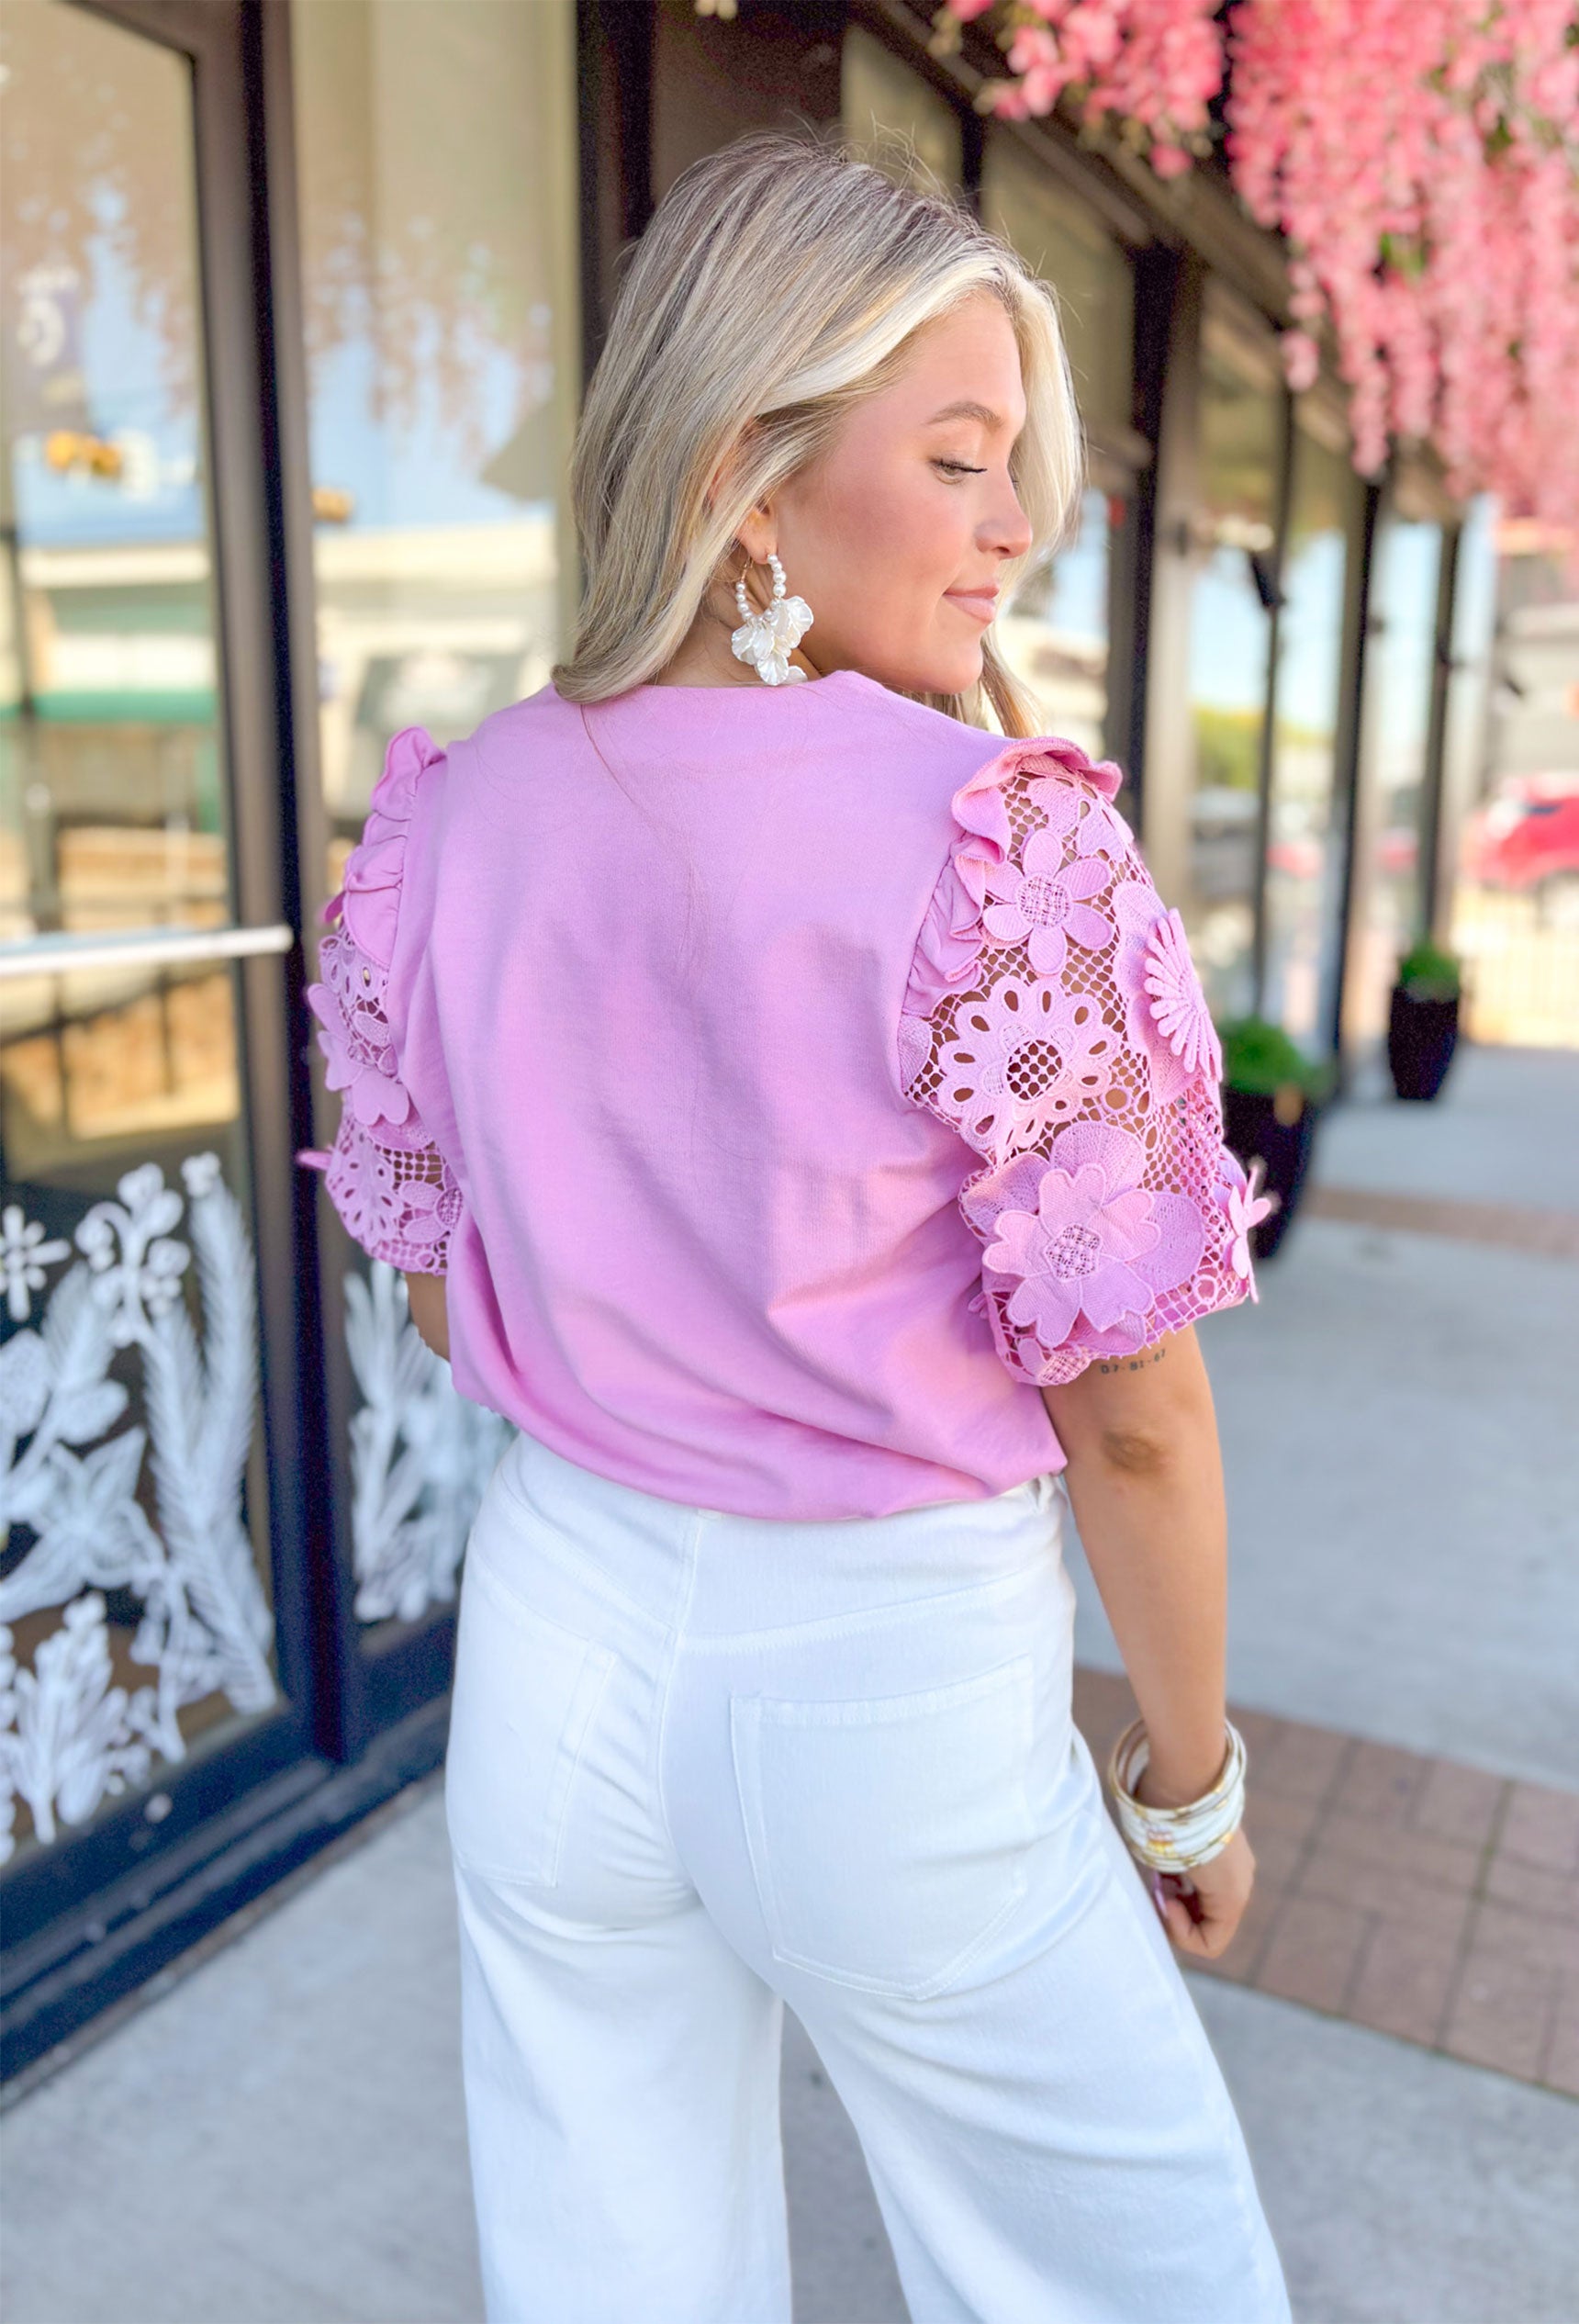 Chasing Love Top in Pink Mauve, light bubble gum pink top with rounded v-neck and floral lace sleeves